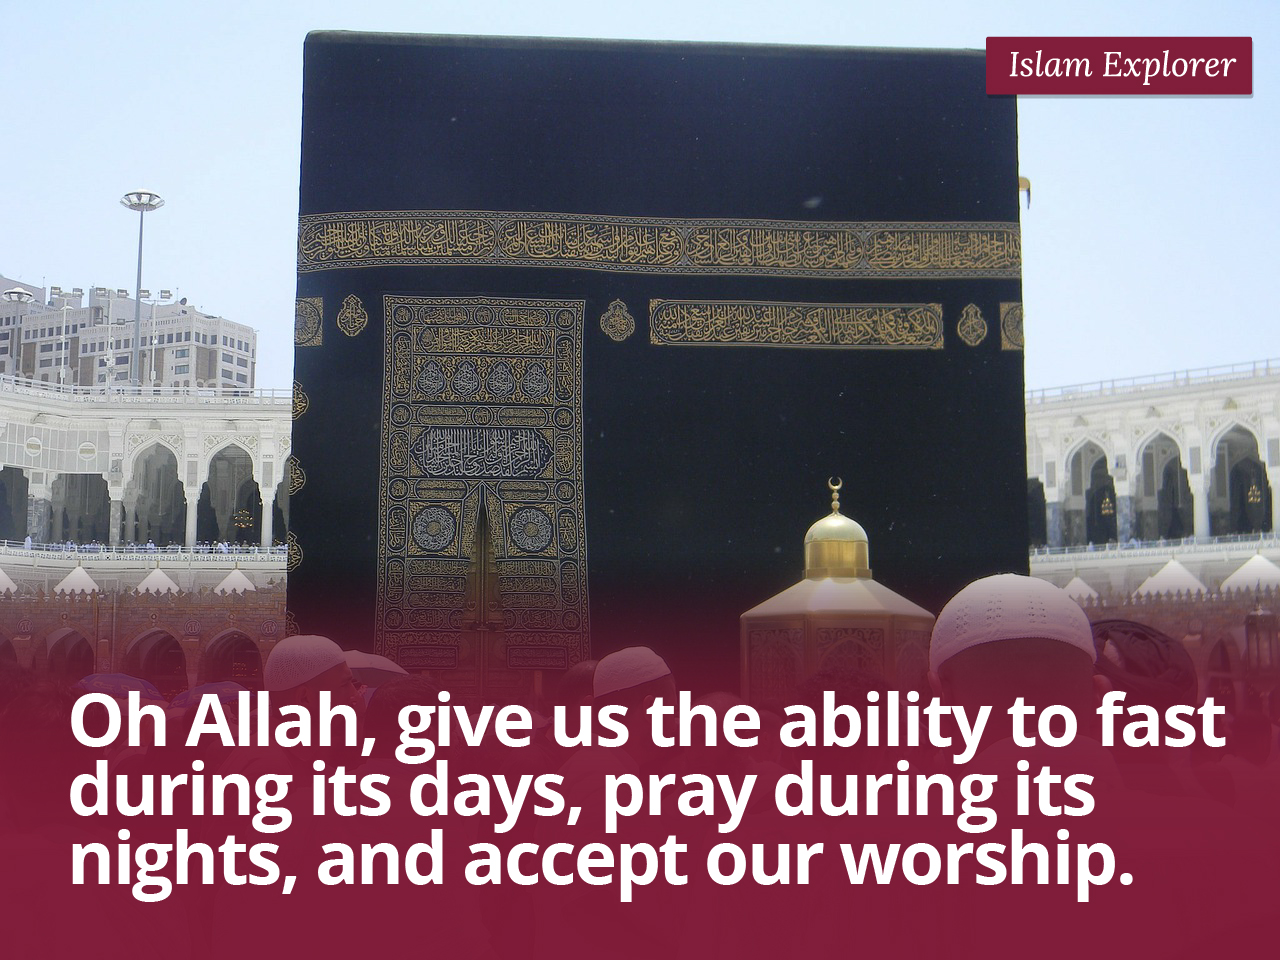 Oh Allah, give us the ability to fast during its days